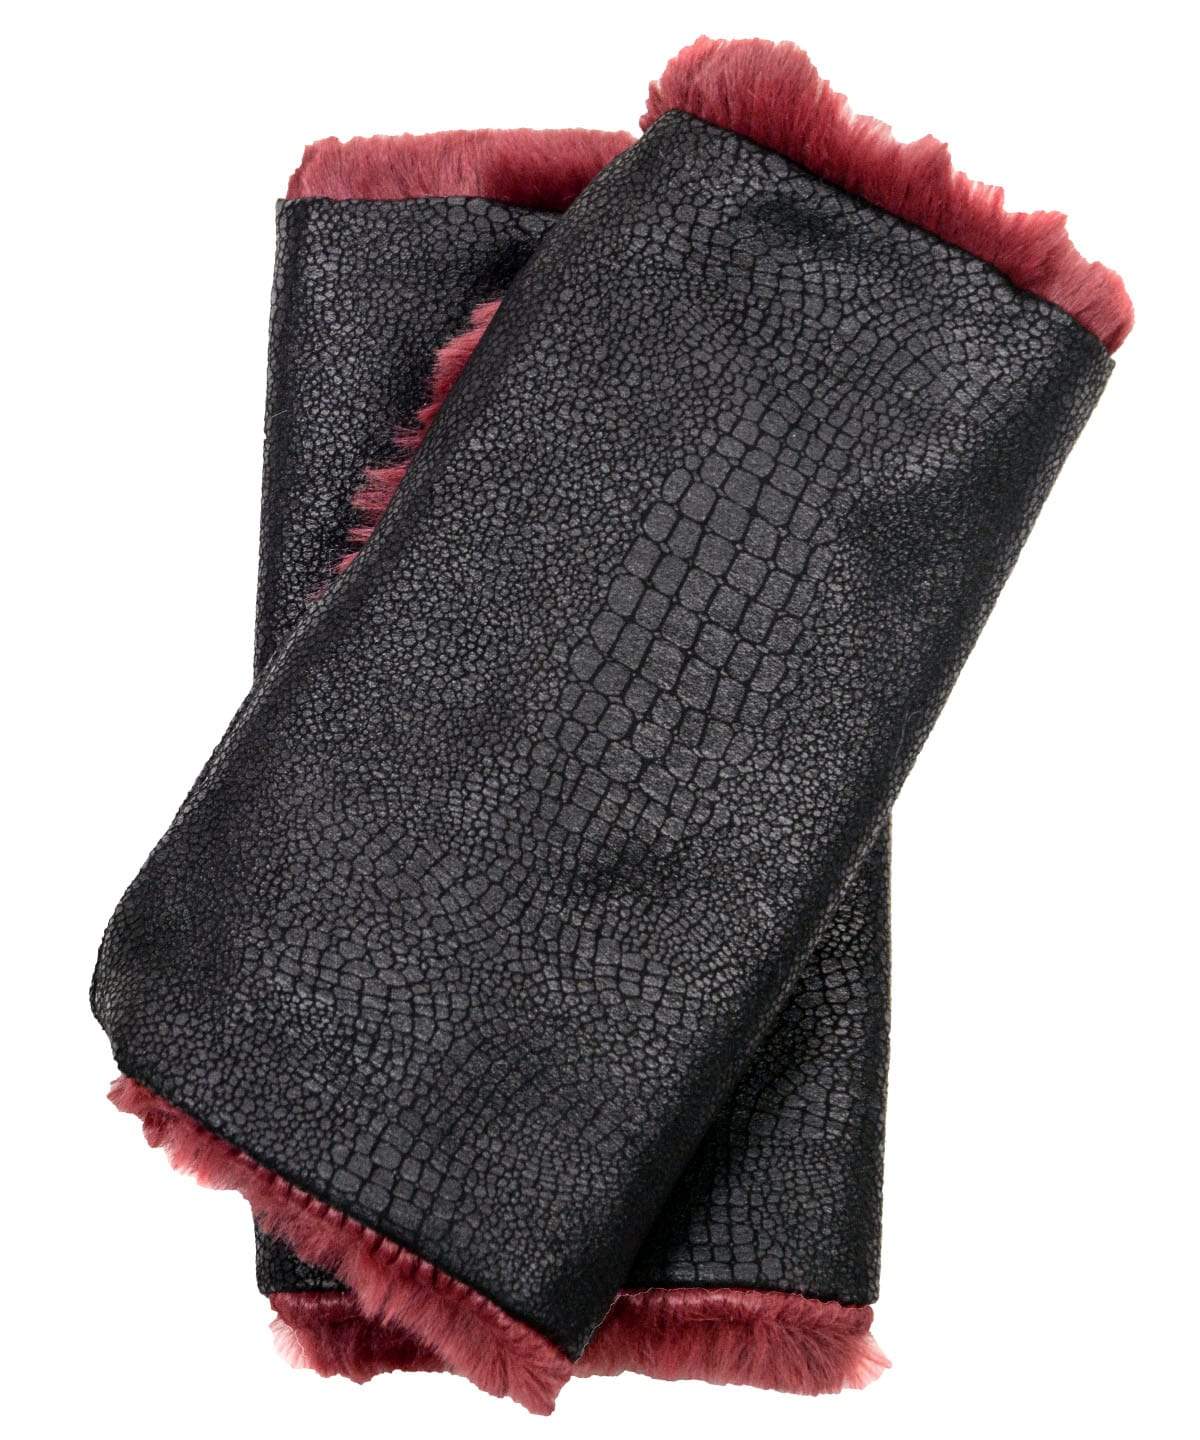 Reversible Fingerless Gloves | Vegan Leather Outback in Black with Cranberry Creek Faux Fur | Pandemonium Millinery